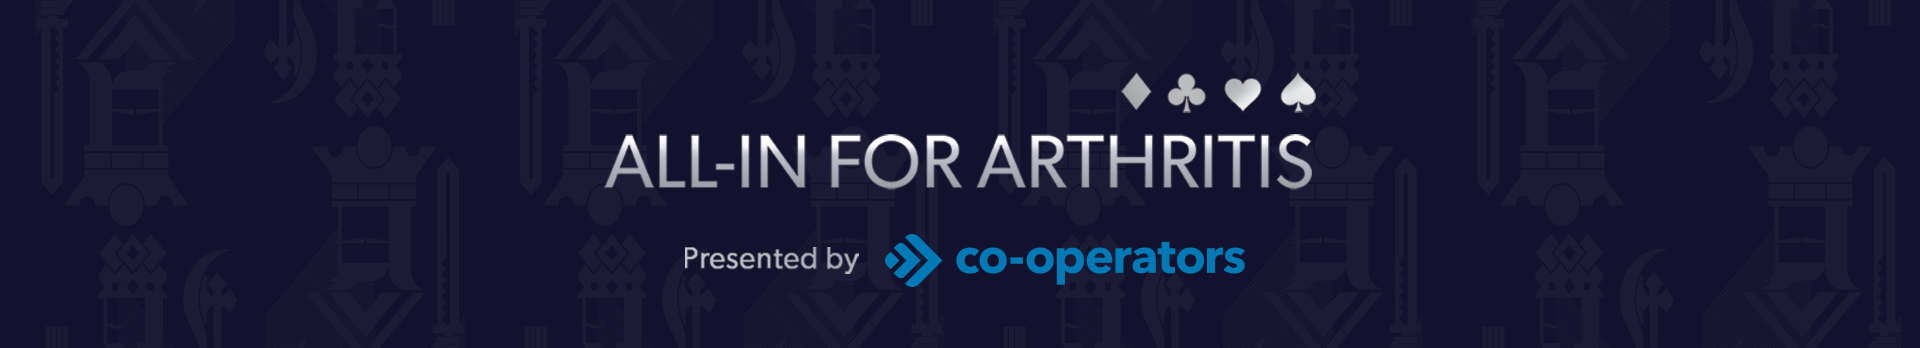 banner with All-In for Arthritis presented by Co-operators